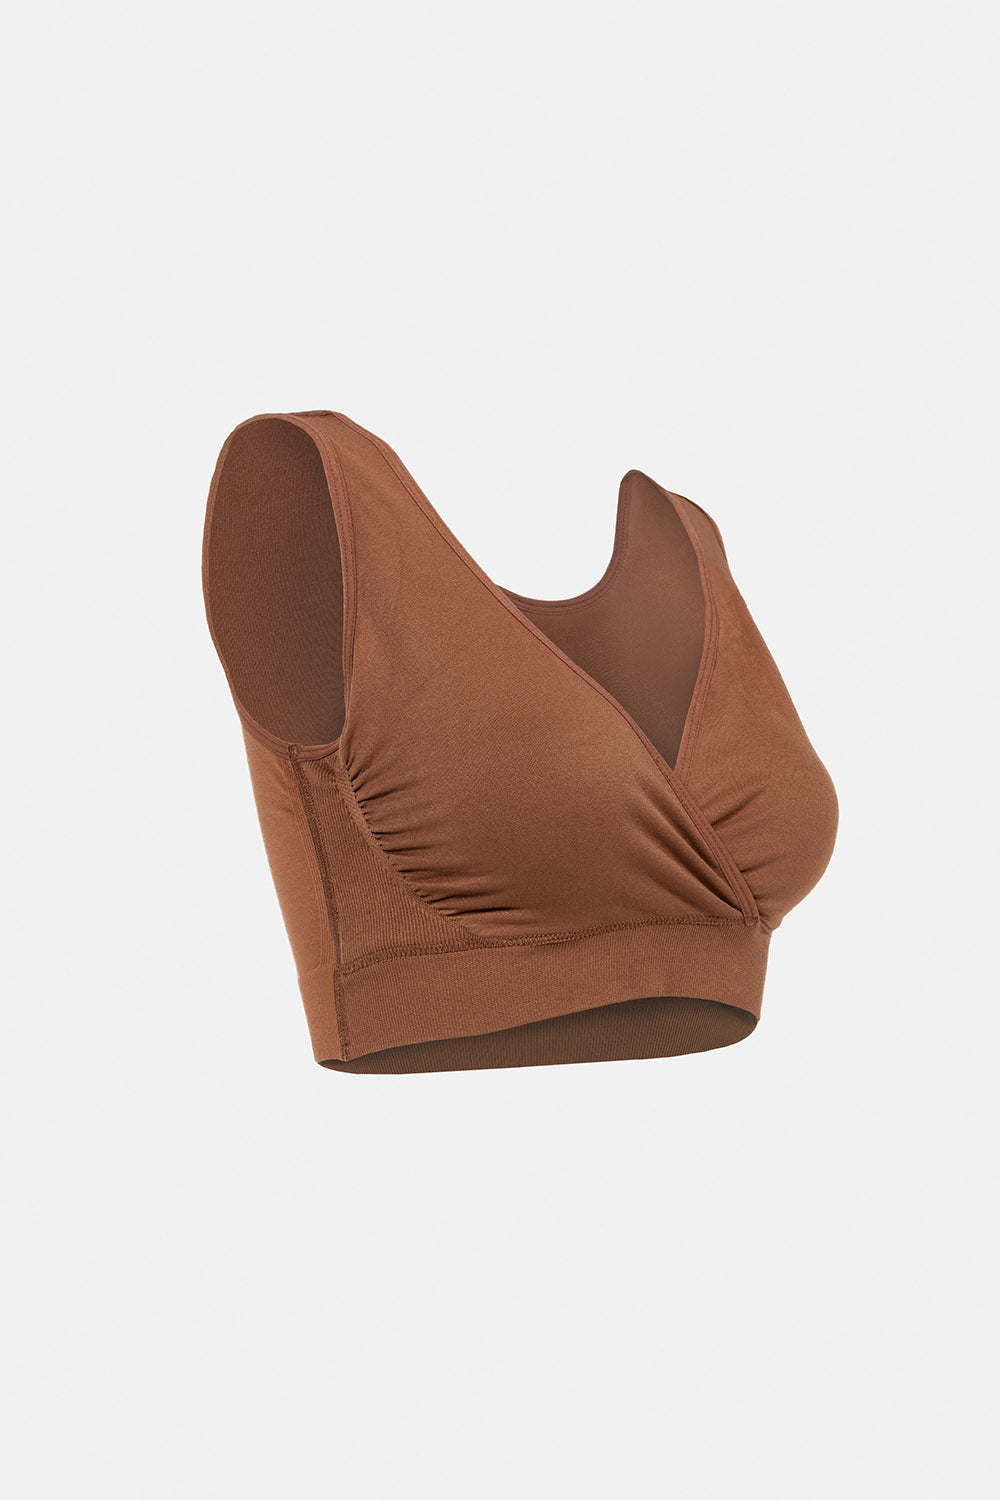 B.D.A.™ Bra For Maternity Support and Breastfeeding